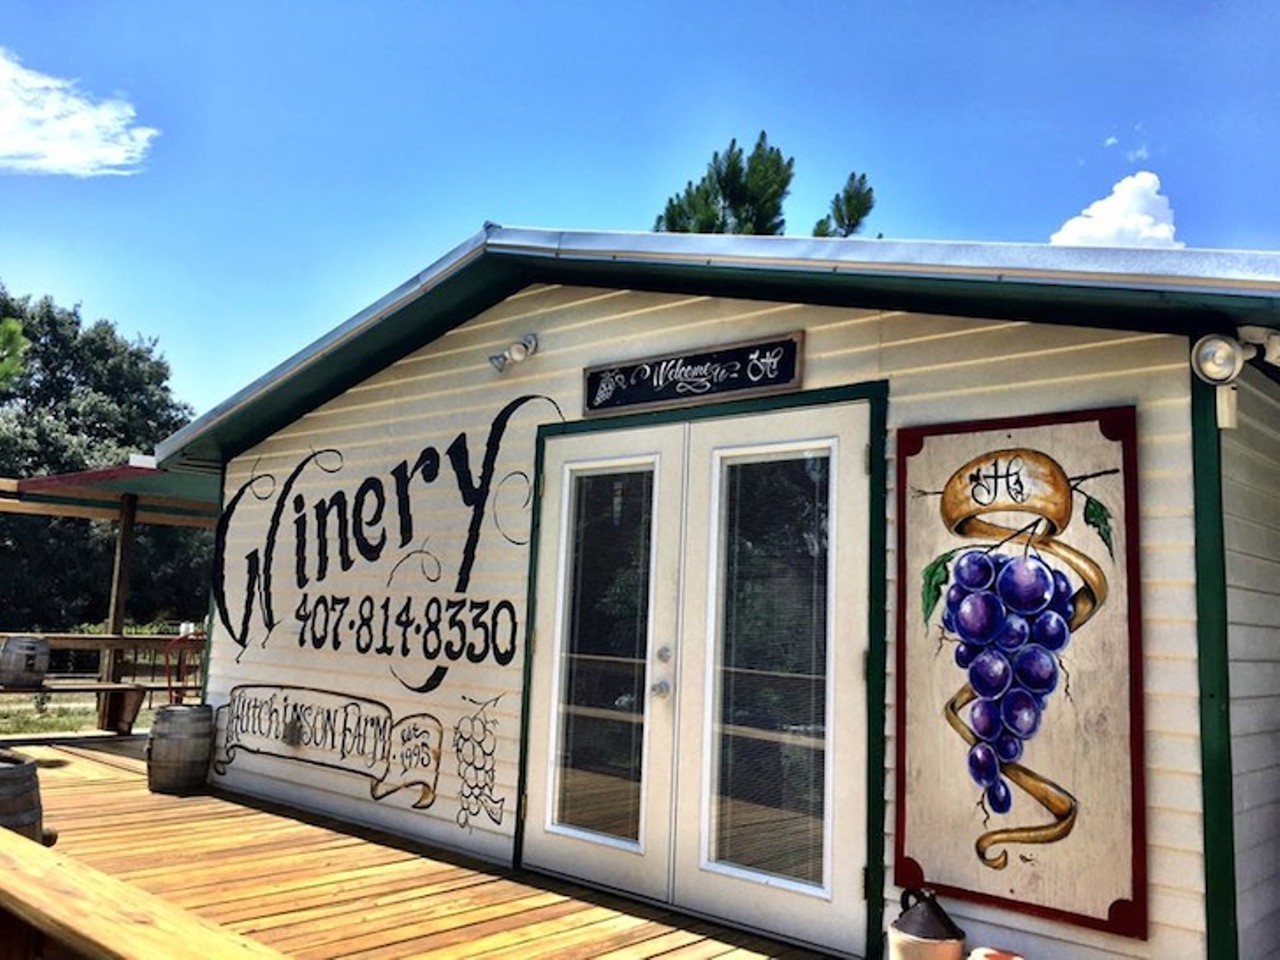 Hutchinson Farm Winery
8061 Stone Road, Apopka | 407-814-8330
Whether you&#146;re in the mood for white, red or something in between, this cozy little winery has got you covered. 
Photo via Drew Hutchinson/Facebook